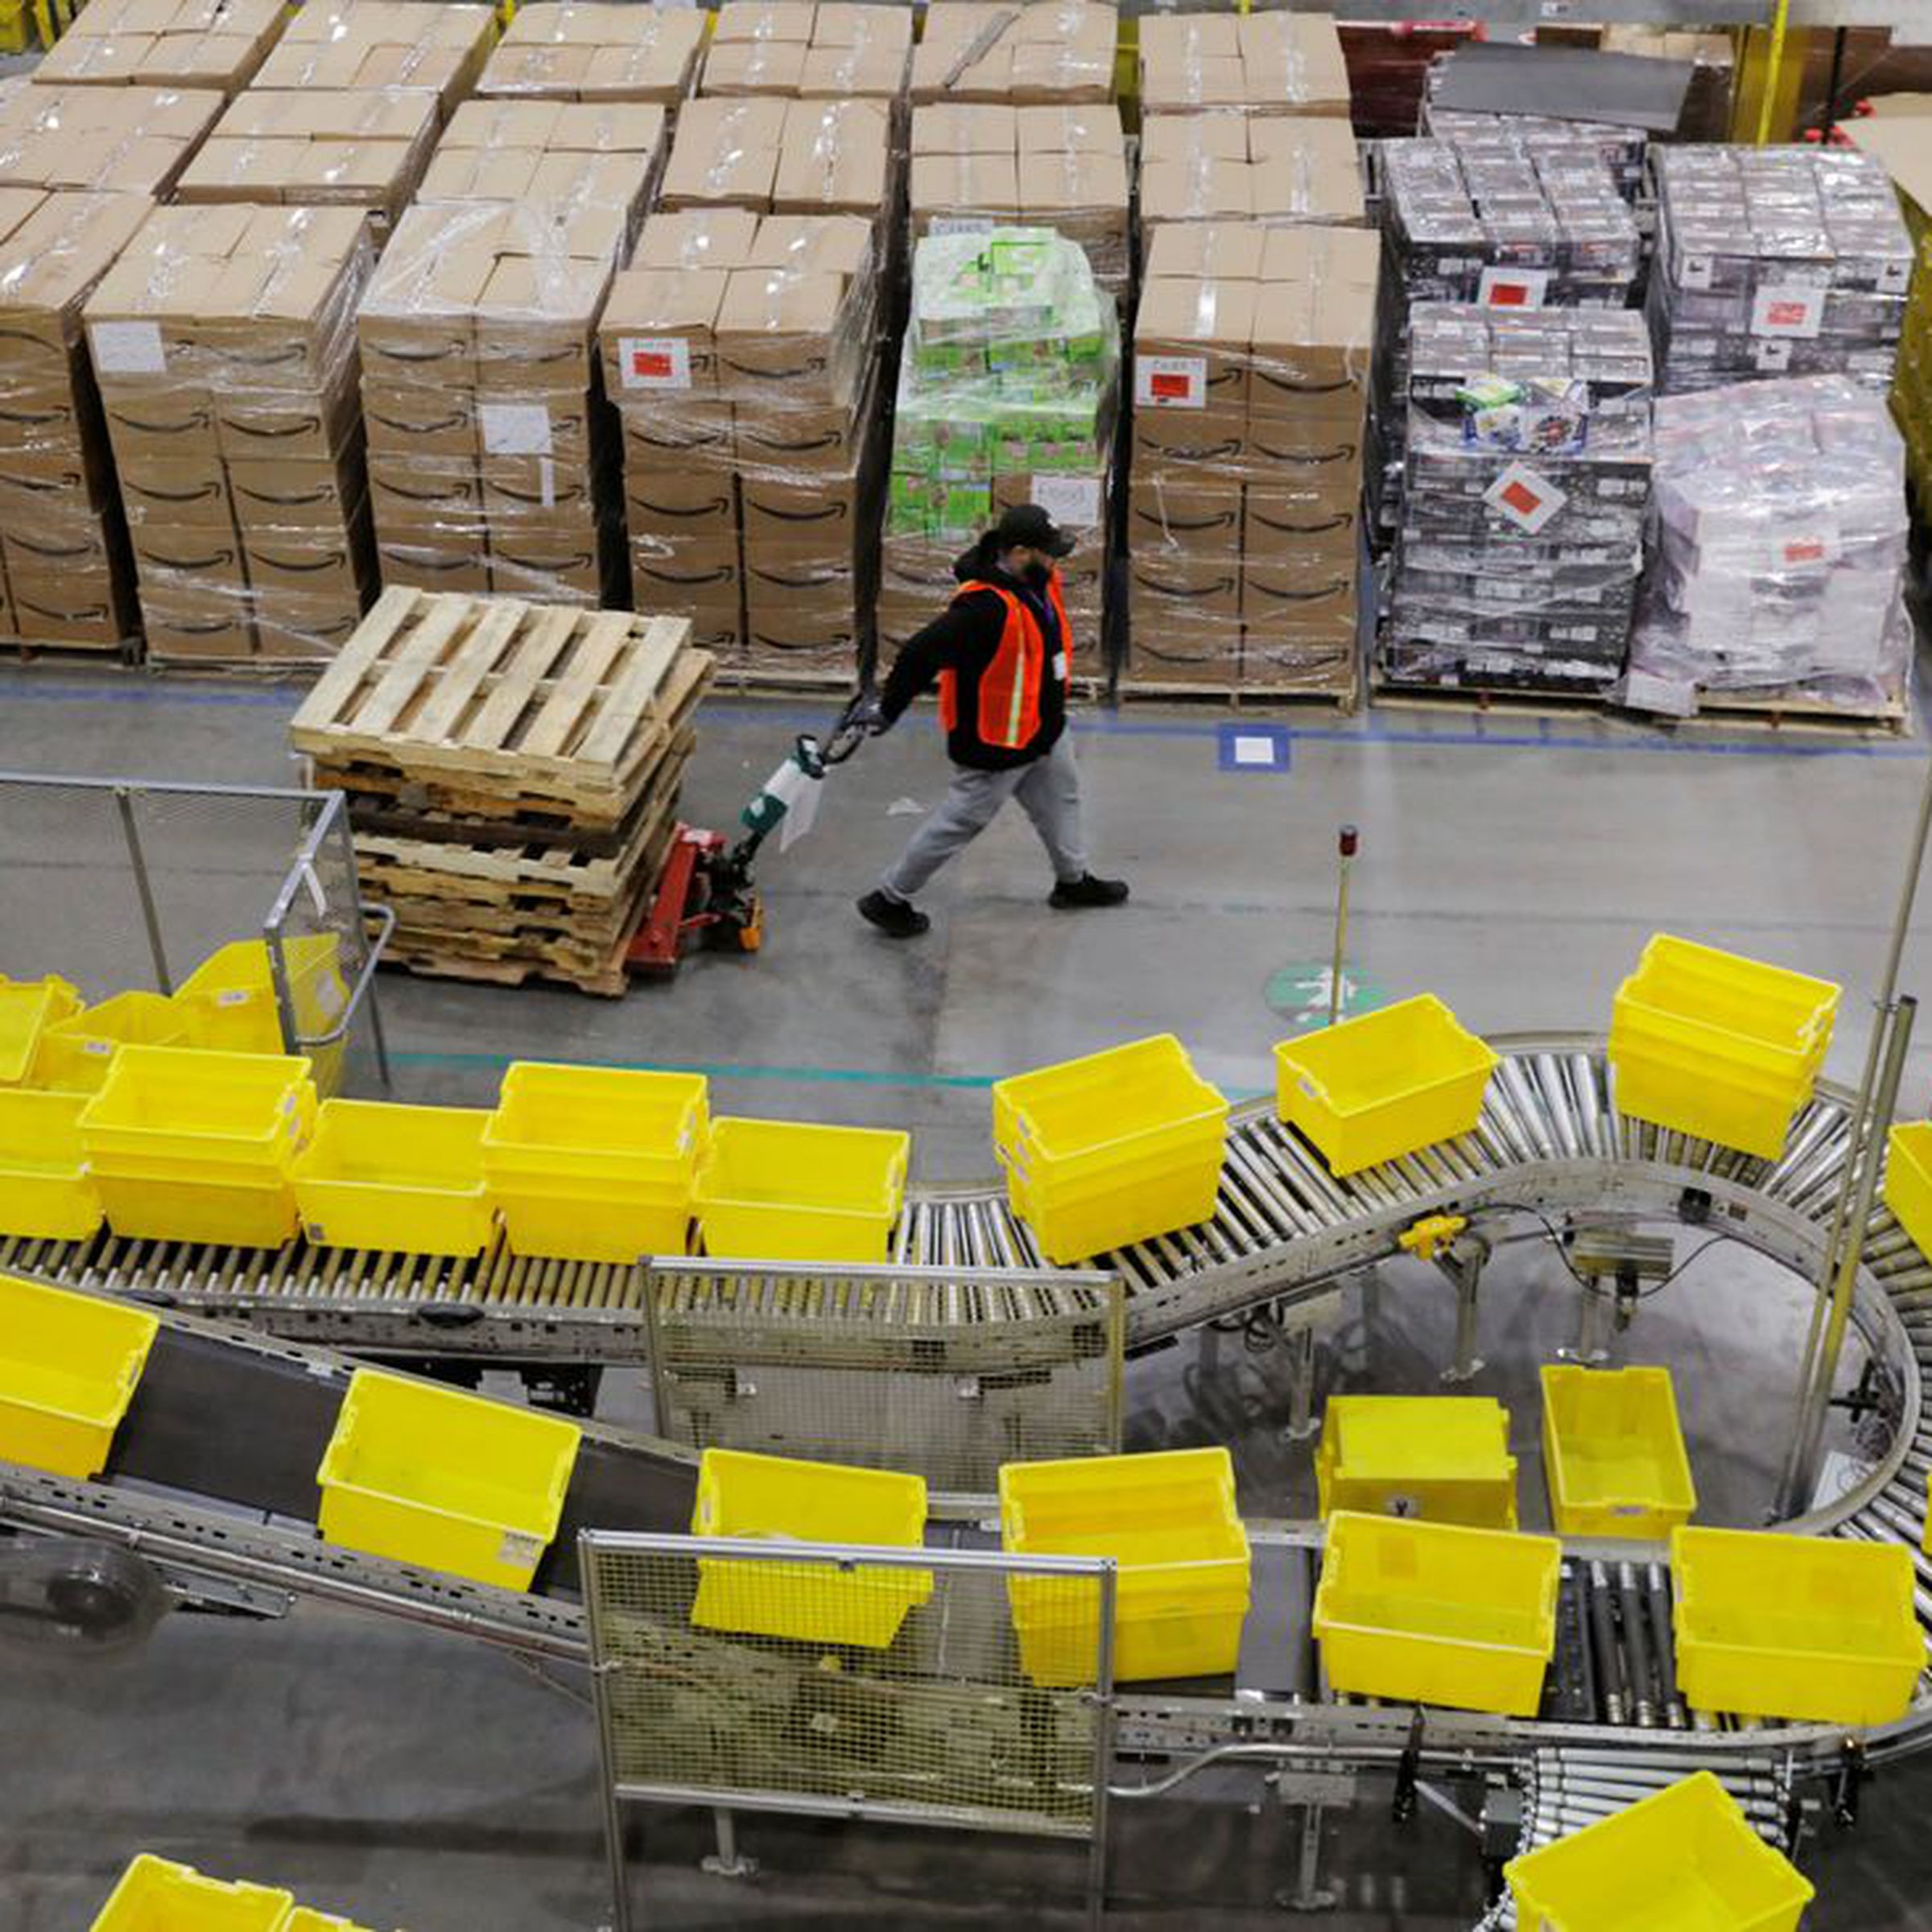 Amazon workers perform their jobs inside of an Amazon fulfillment center.